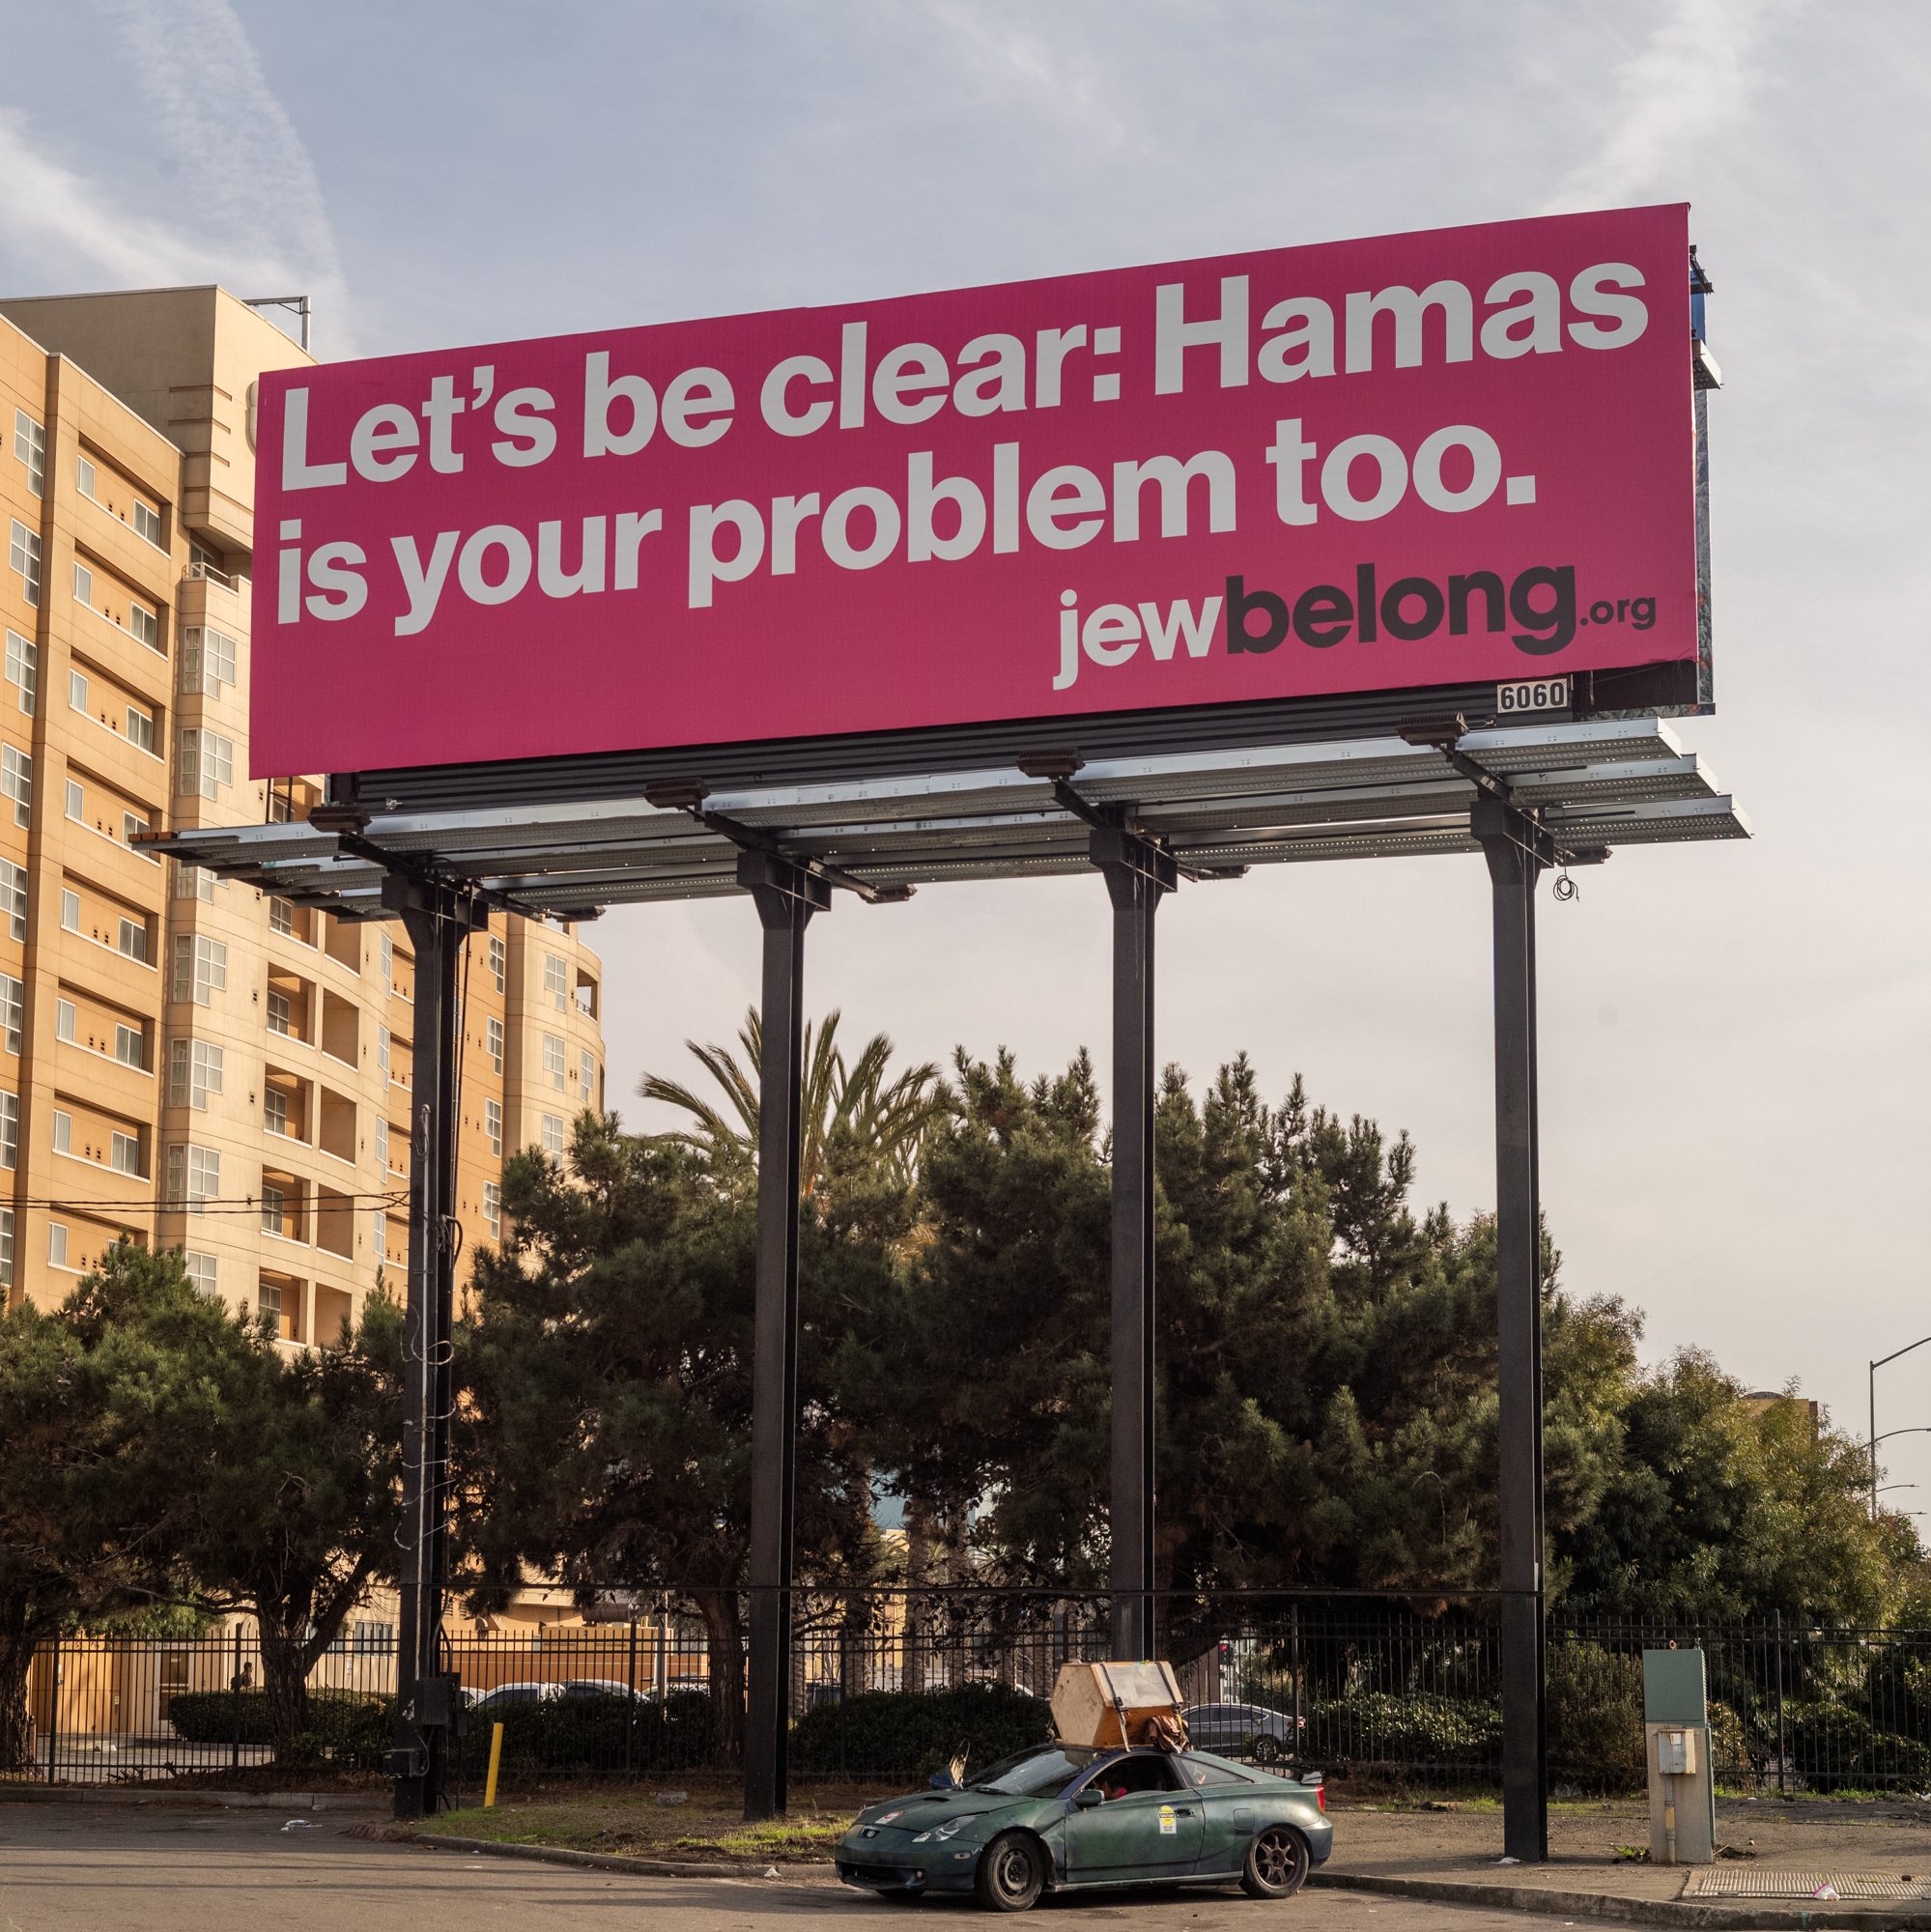 A billboard reading “Let’s be clear: Hamas is your problem too. Jewbelong.org” next to Highway 580 in Emeryville.